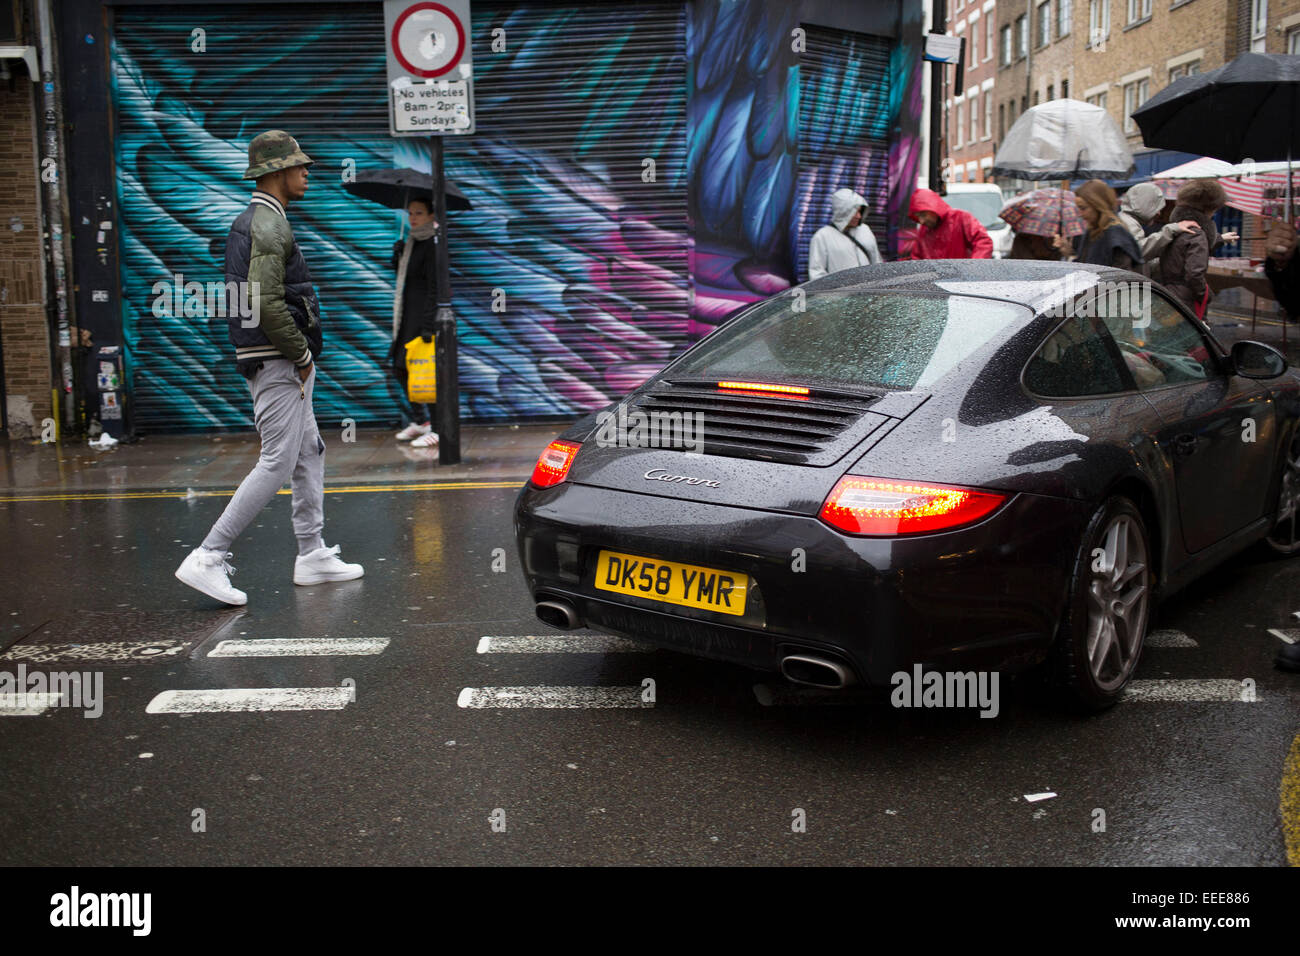 Wet day on Brick Lane in the East End of London, UK. Porche 911 drives through the market as people go about their day. It is an illustration of the haves and have nots as a sports car worth tens of thousands of pounds drives past stalls selling super cheap goods. Stock Photo